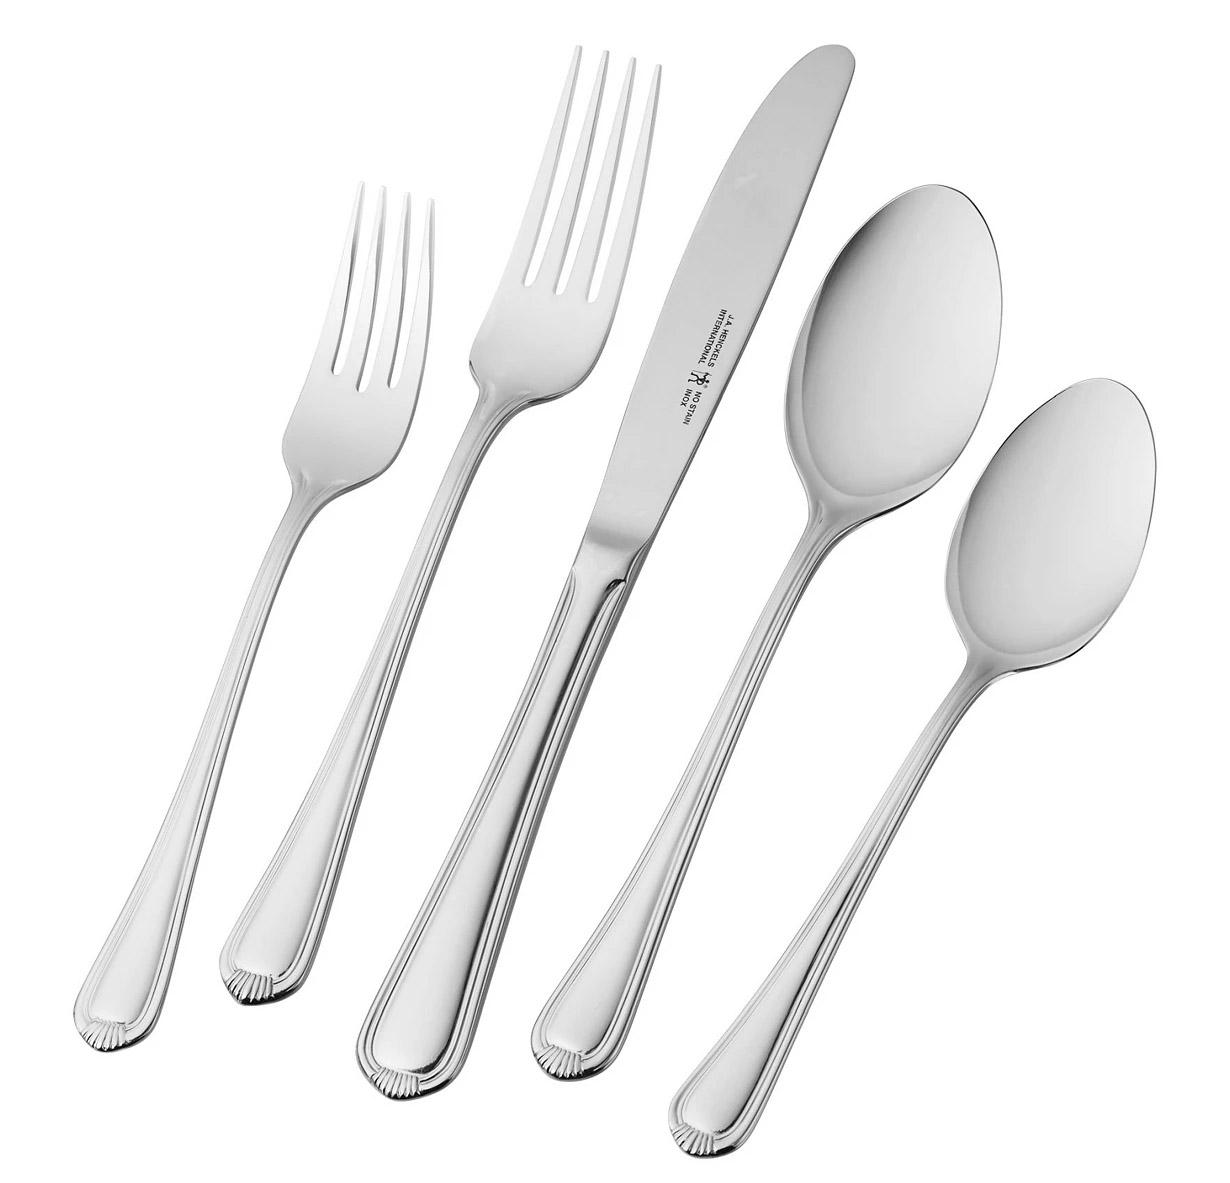 20-Piece JA Henckels 18 10 Stainless Steel Flatware Sets for $28.99 Shipped